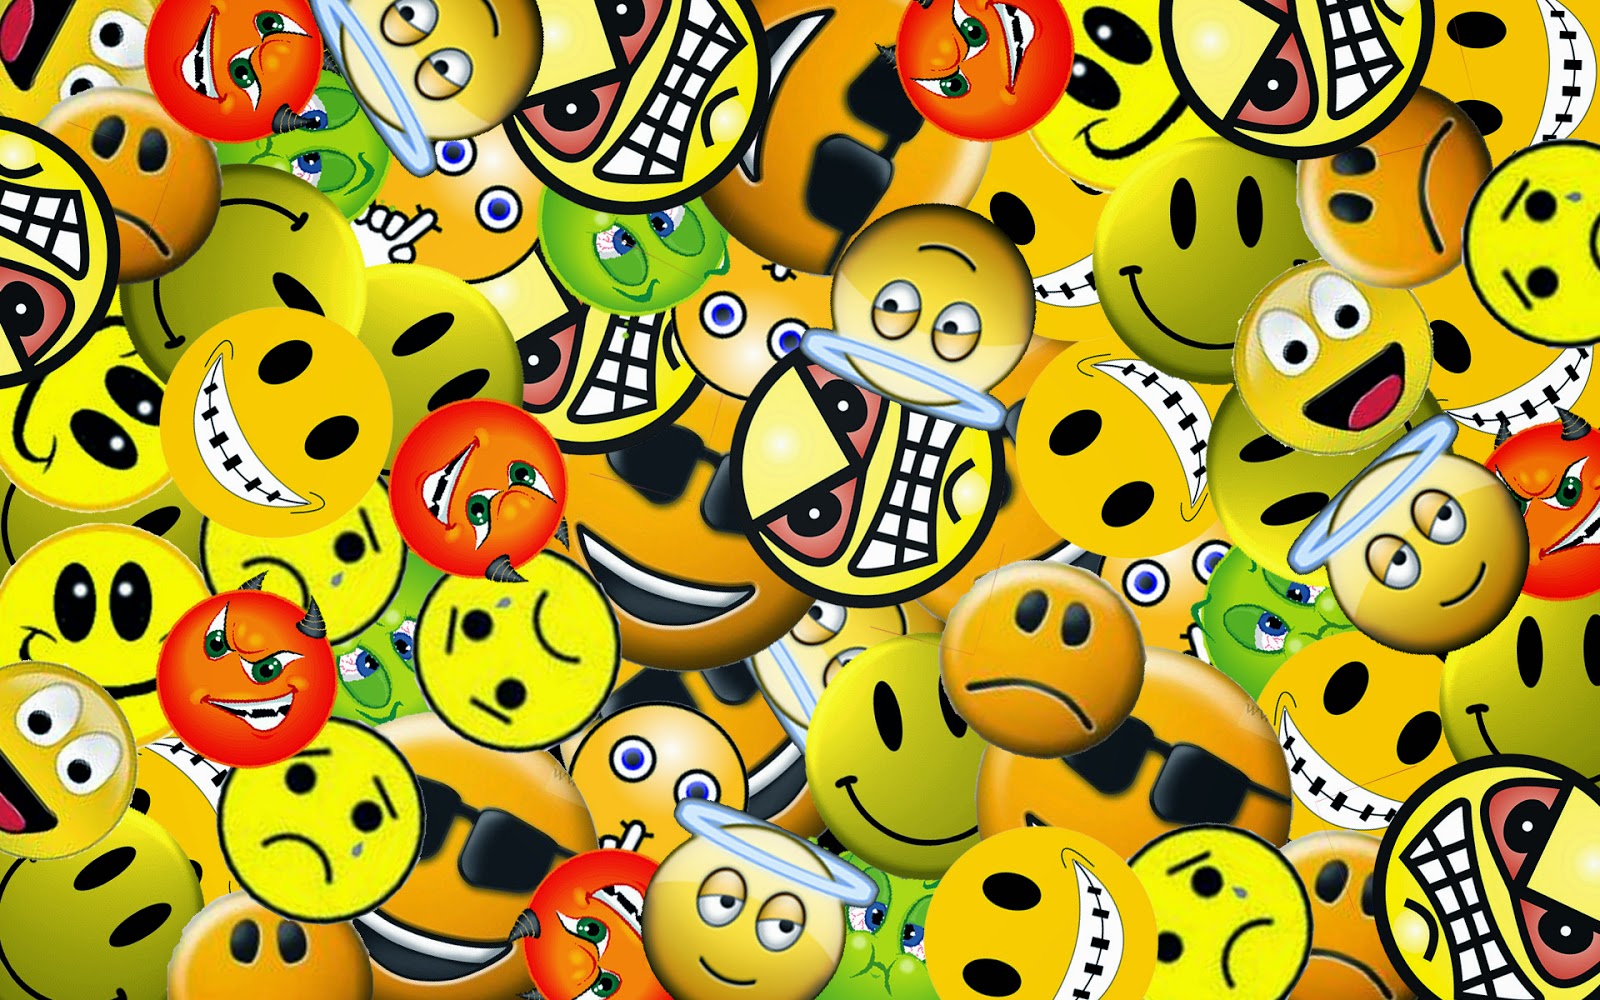 smiley face background hd wallpaper for mobile free download